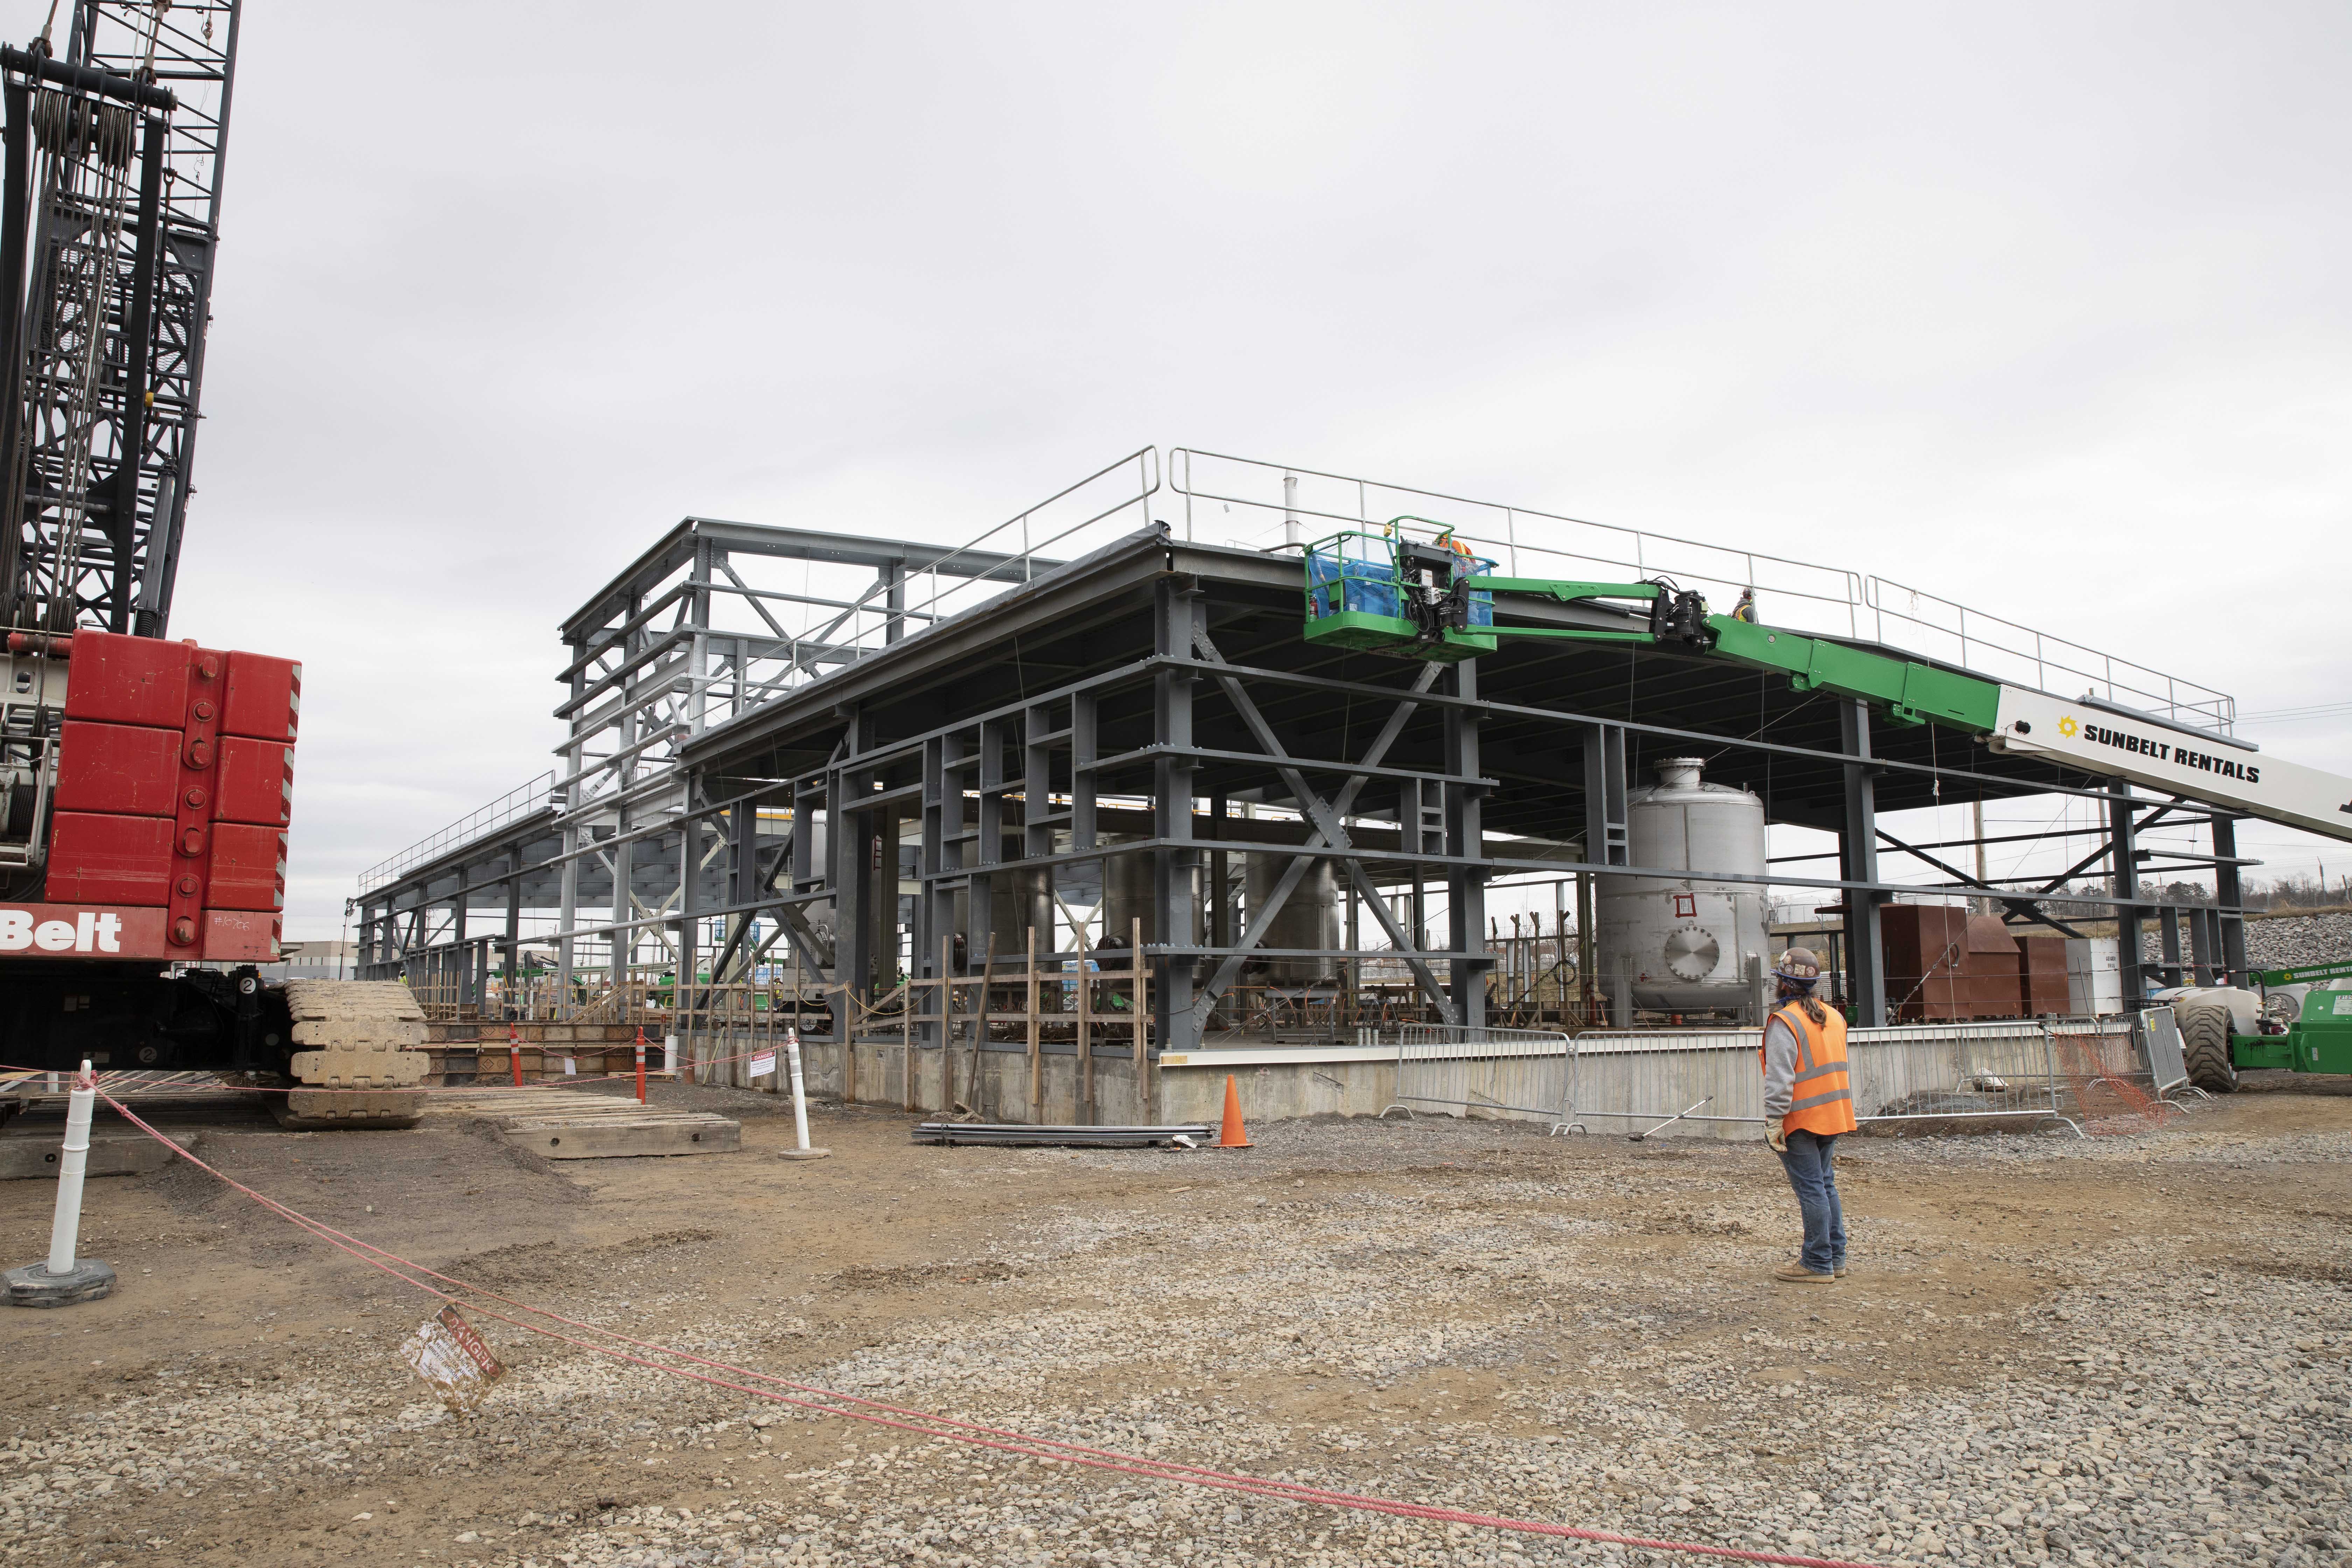 The UPF Process Support Facilities building was successfully topped out and the installation of structural steel is complete.